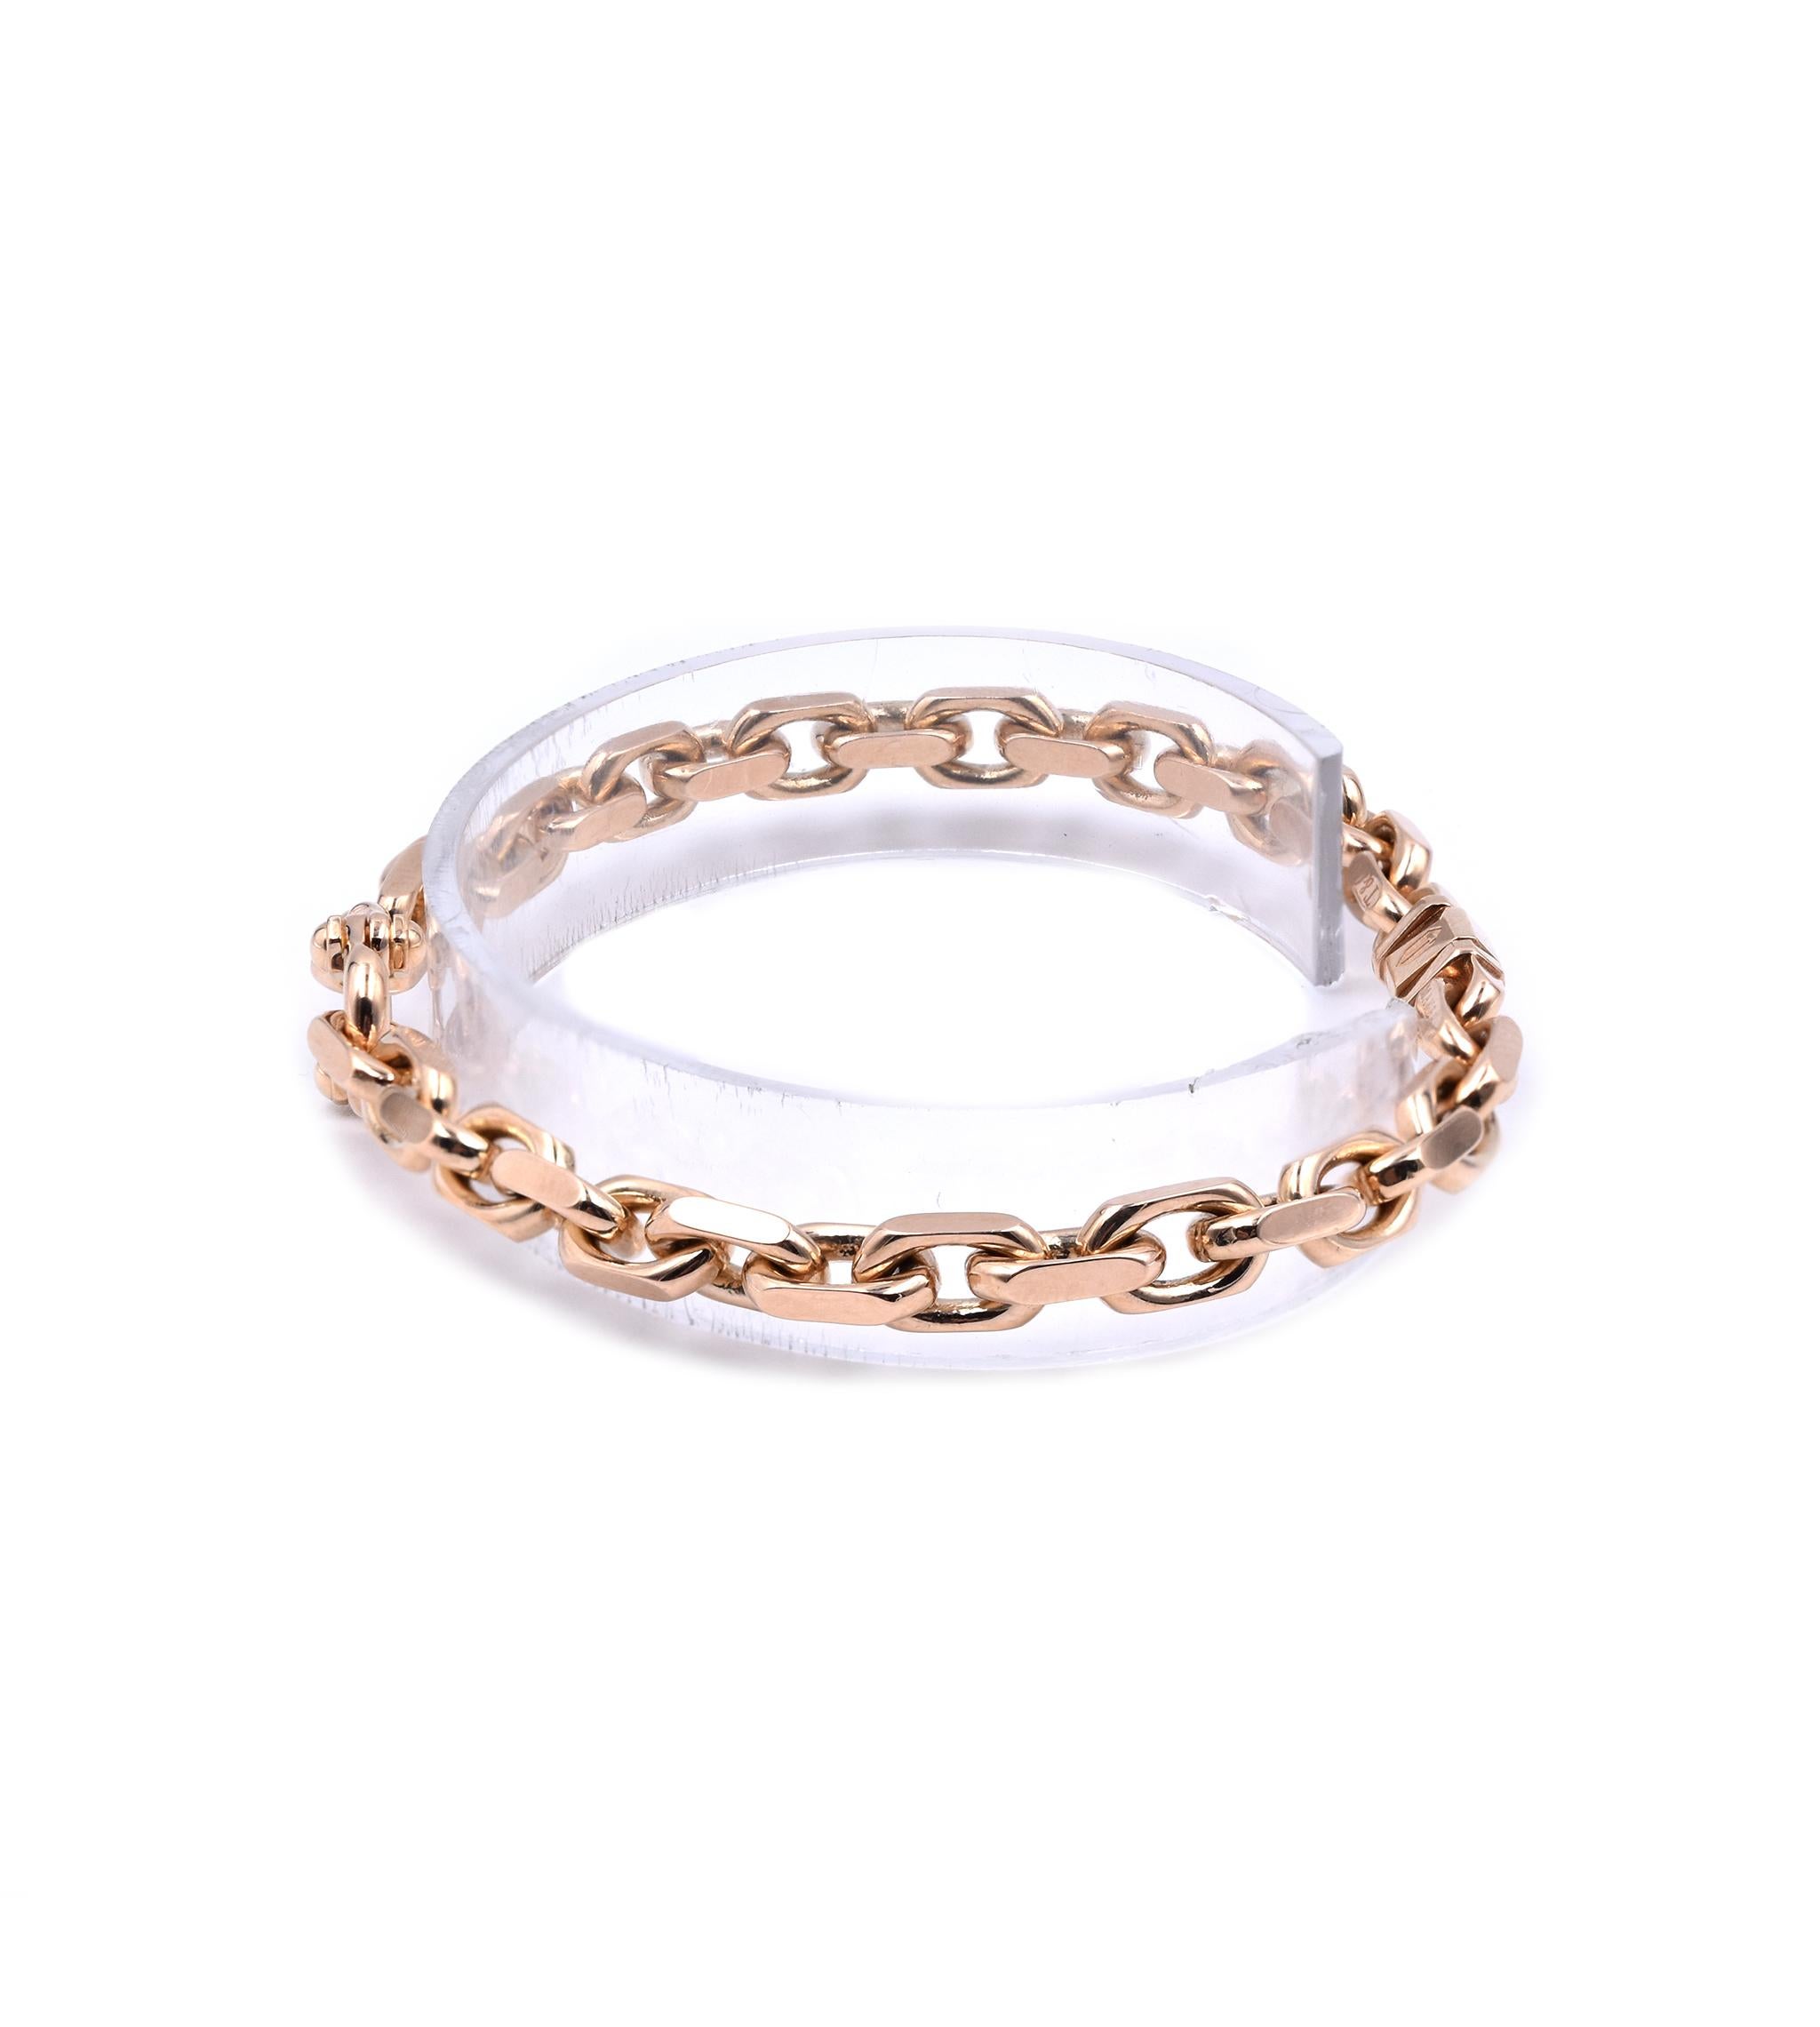 Designer: Tiffany & Co. 
Material: 18K rose gold
Dimensions: bracelet measures 8-inches long
Weight: 31.84 grams
